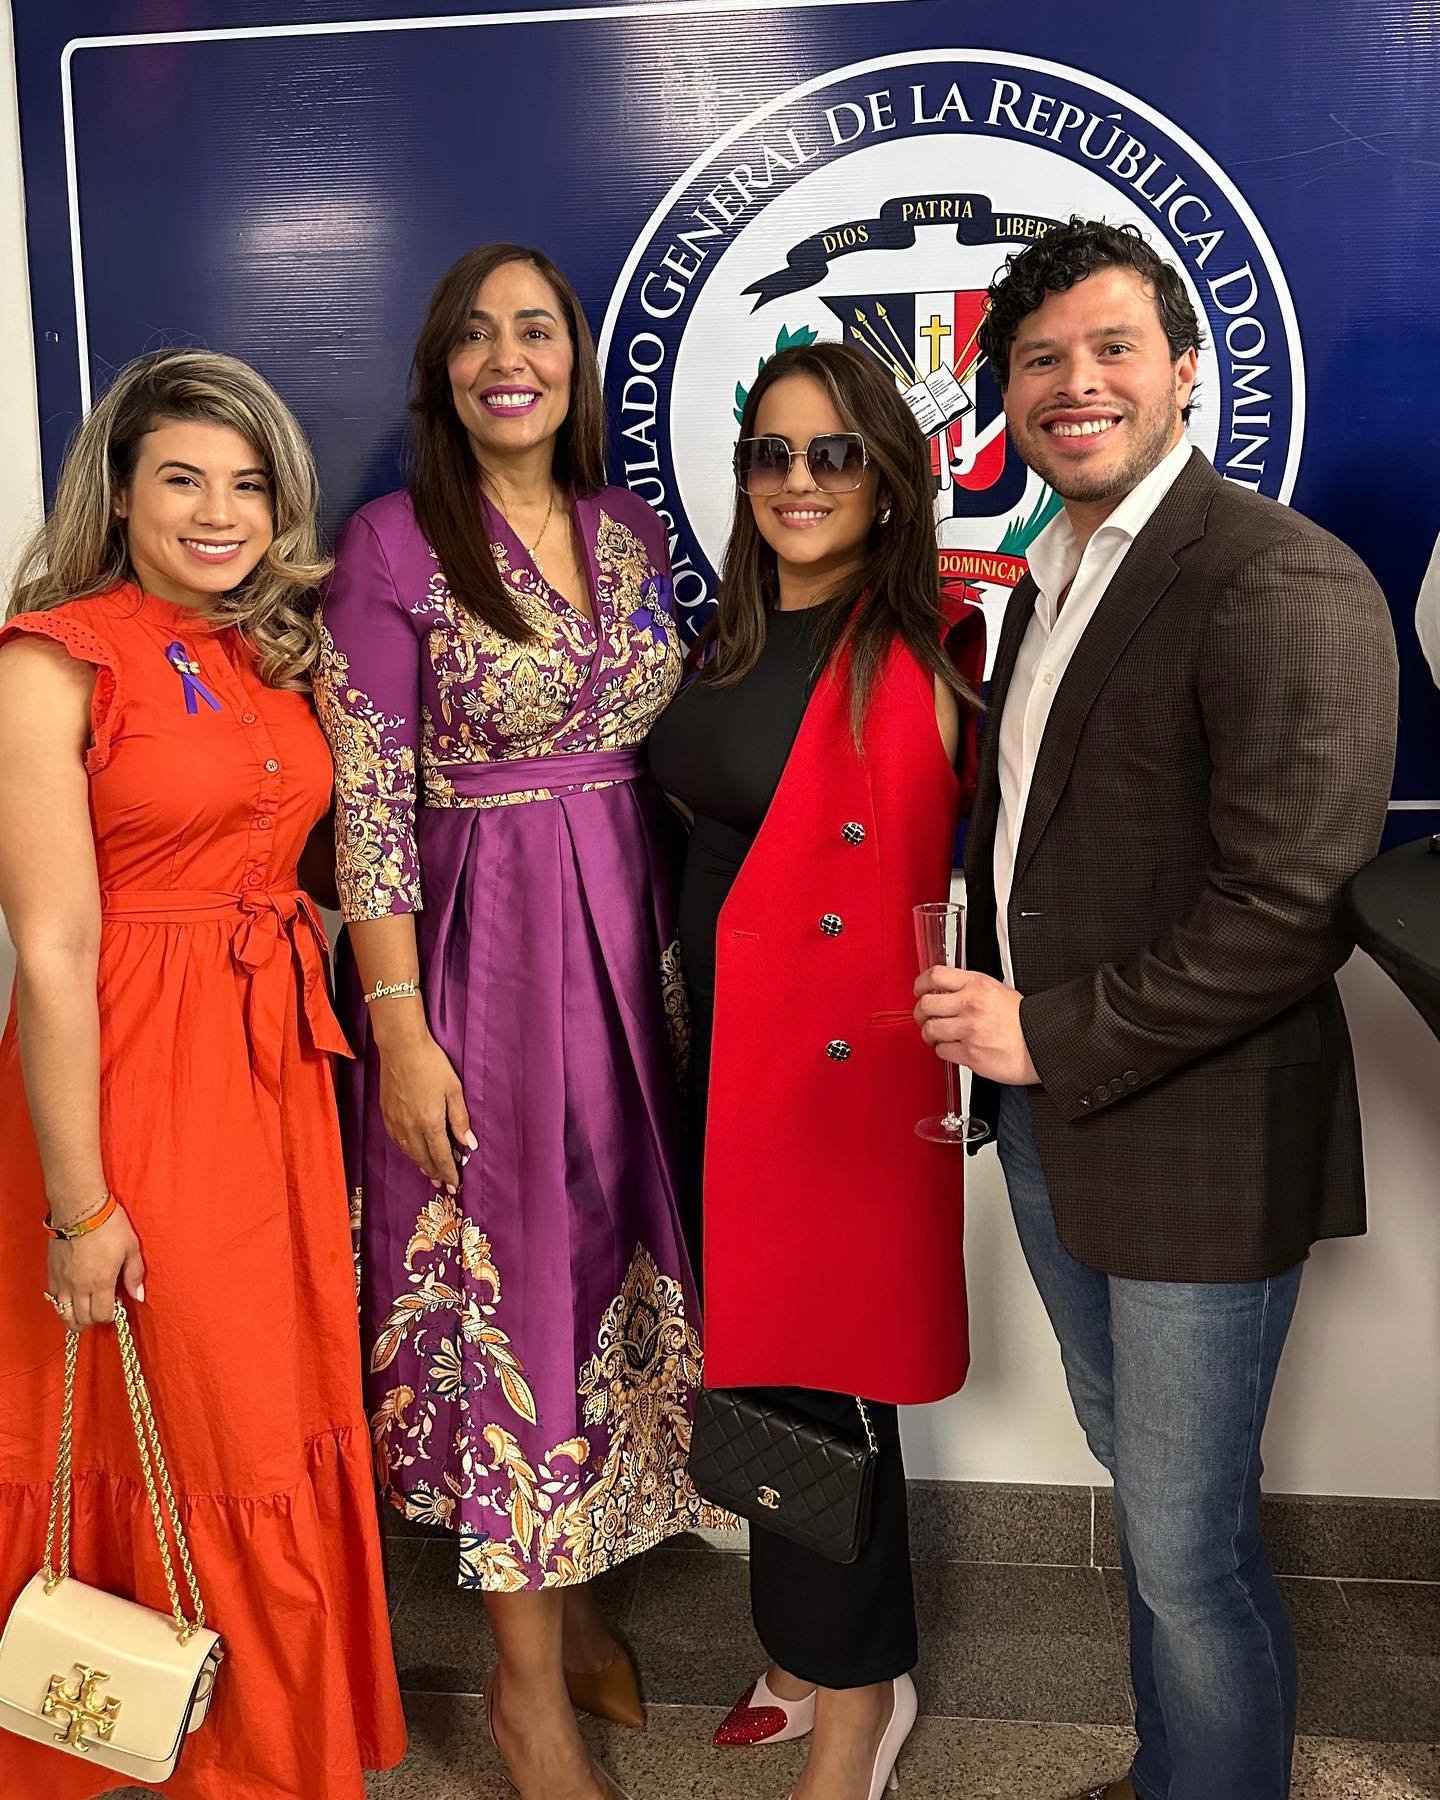 This past Friday, we had the privilege of celebrating Women&rsquo;s History Month with the Dominican Consulate in Houston. We extend our heartfelt gratitude to Ms. Leidy Rosario, @leidyrosario746 the General Consul of the Dominican Republic, and her 